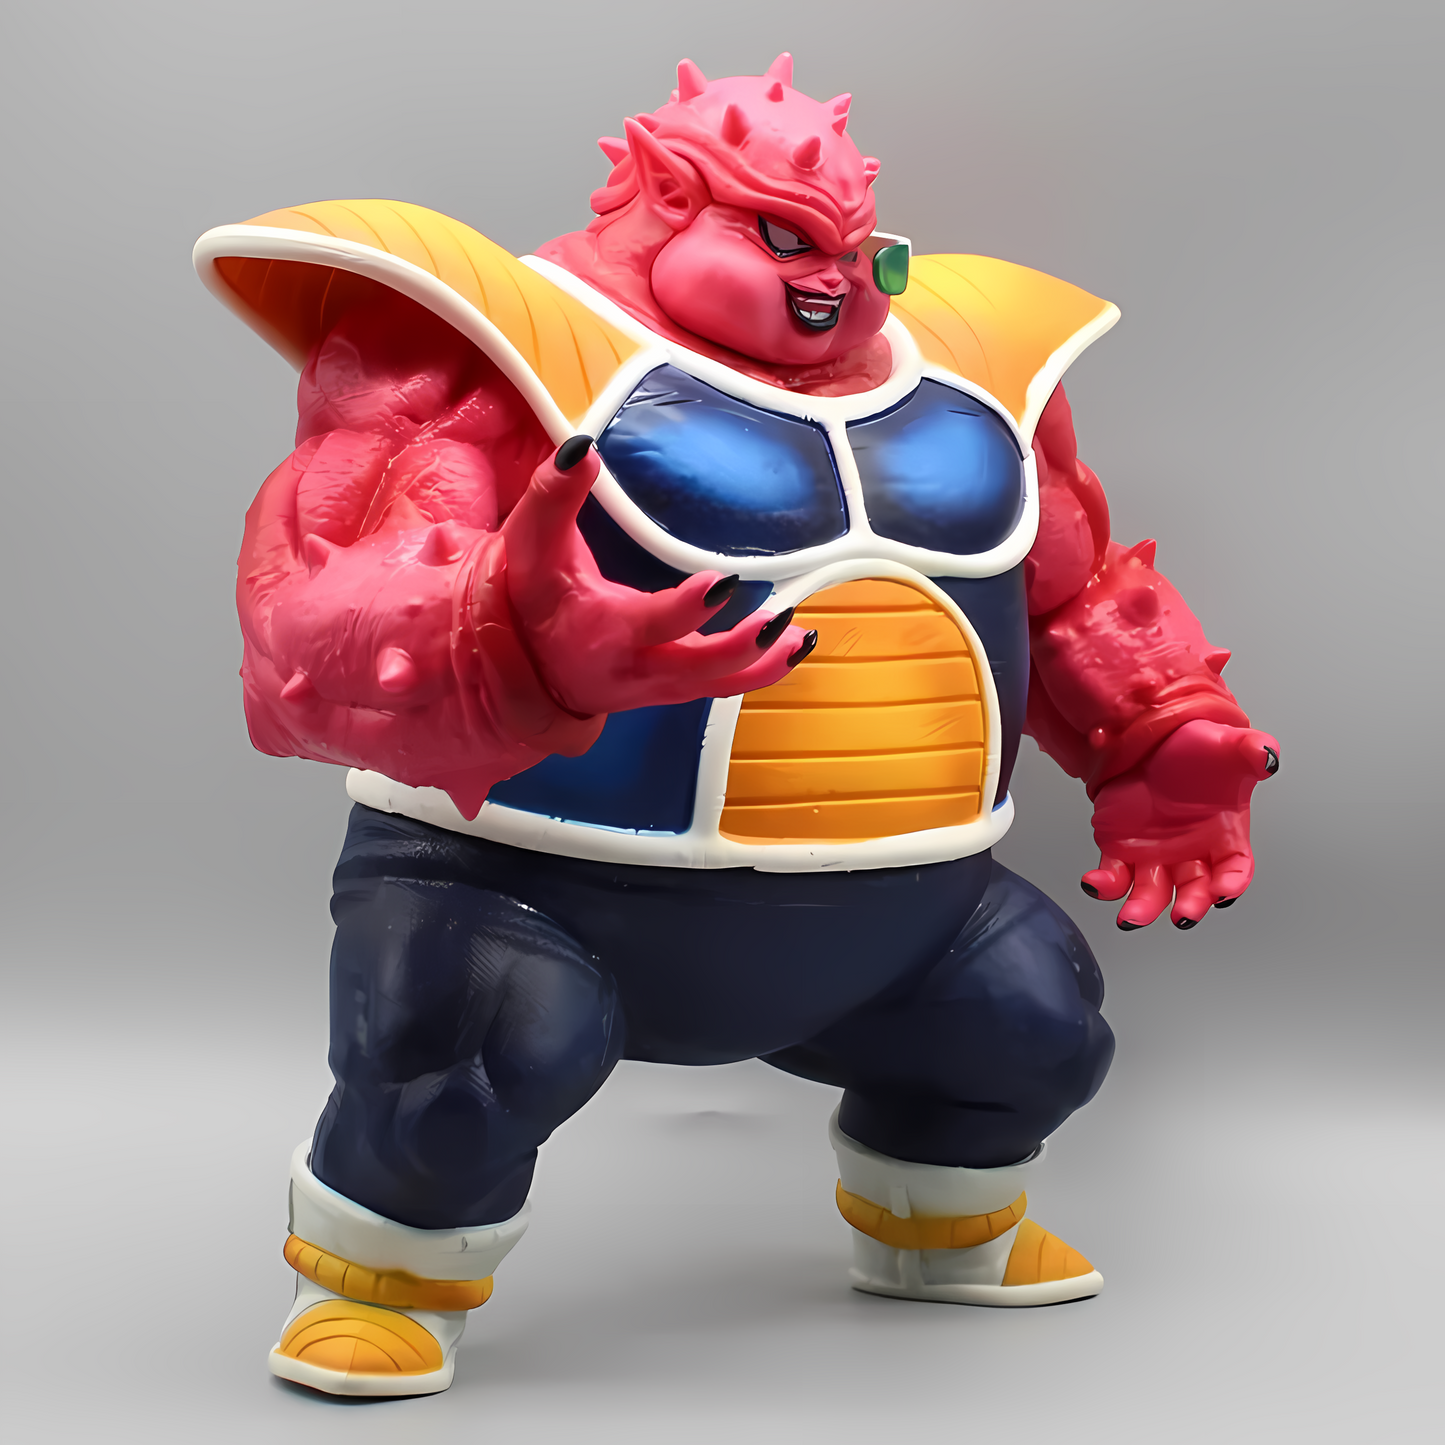 The 'Precision Dodoria' figure captured from the front, with its pinkish-red skin and a smirking expression behind sunglasses, ready for battle.